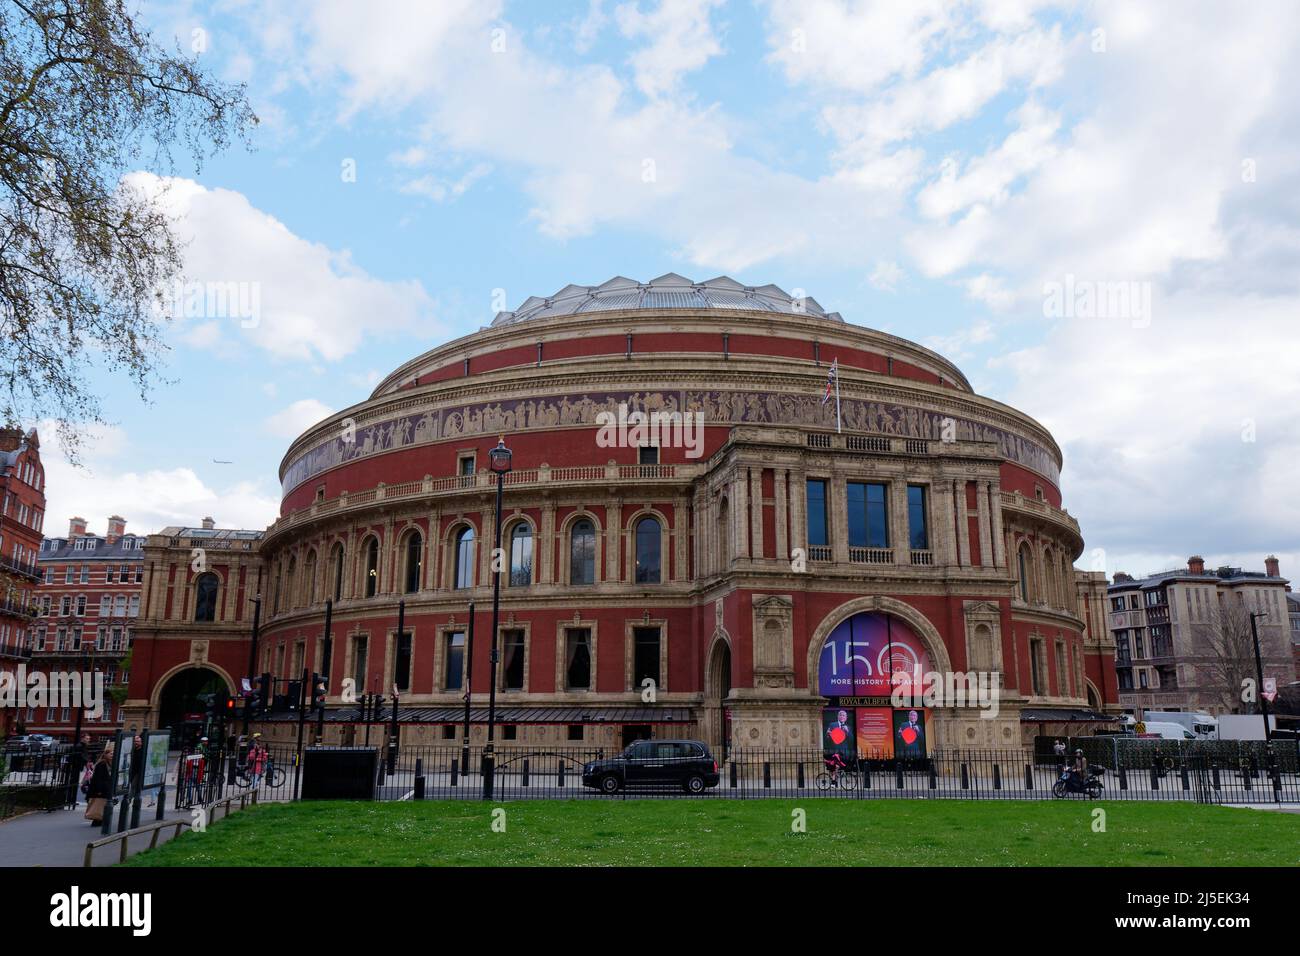 London, Greater London, England, April 13 2022: Taxi and Motorbike pass the Royal Albert Hall, a famous concert hall in South Kensington. Stock Photo